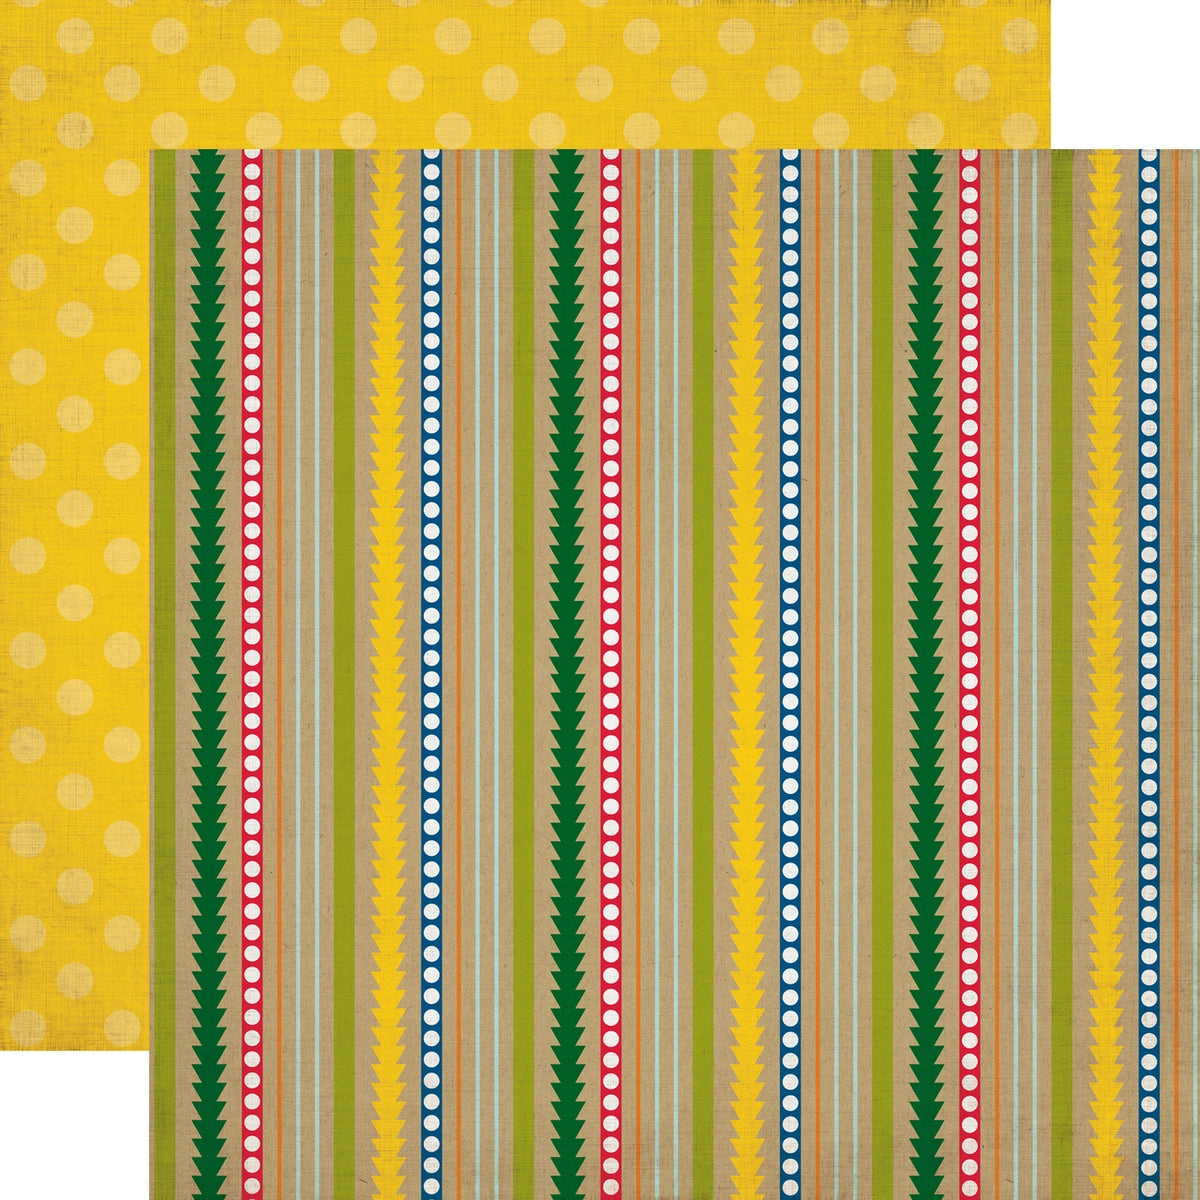 Jungle Fun patterned cardstock (green vines along with other bright colored stripes on a tan background with light yellow dots on yellow background reverse)